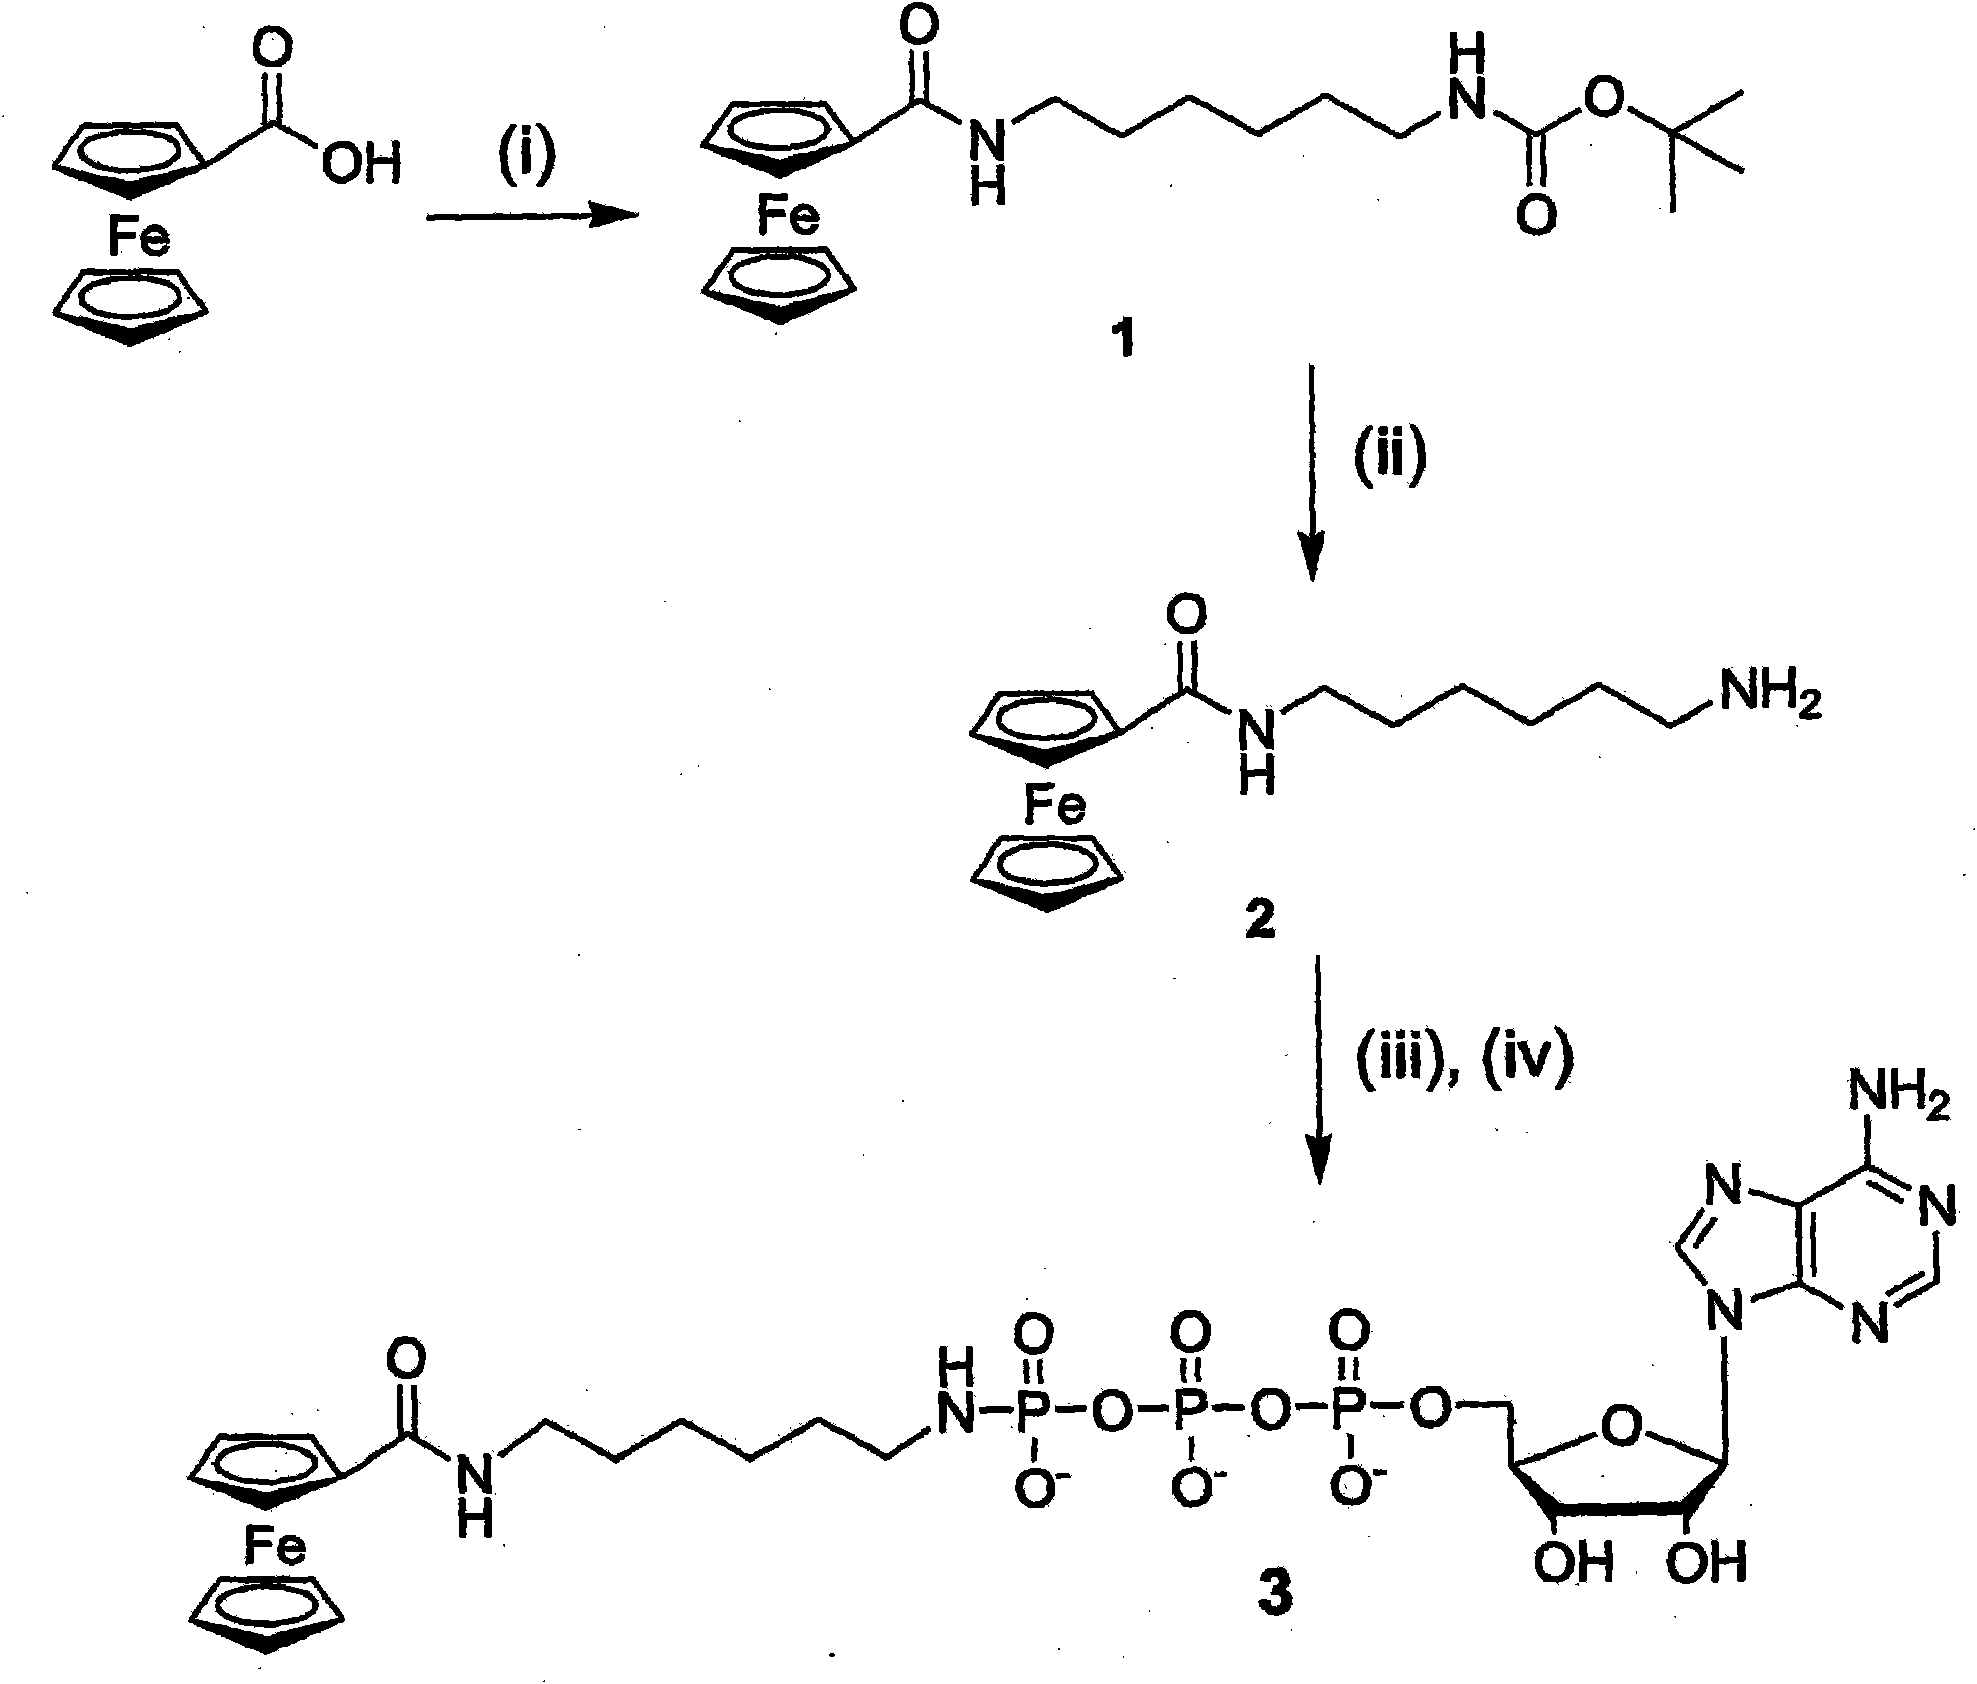 Nucleotide triphosphate with an electroactive label conjugated to the gamma phosphate